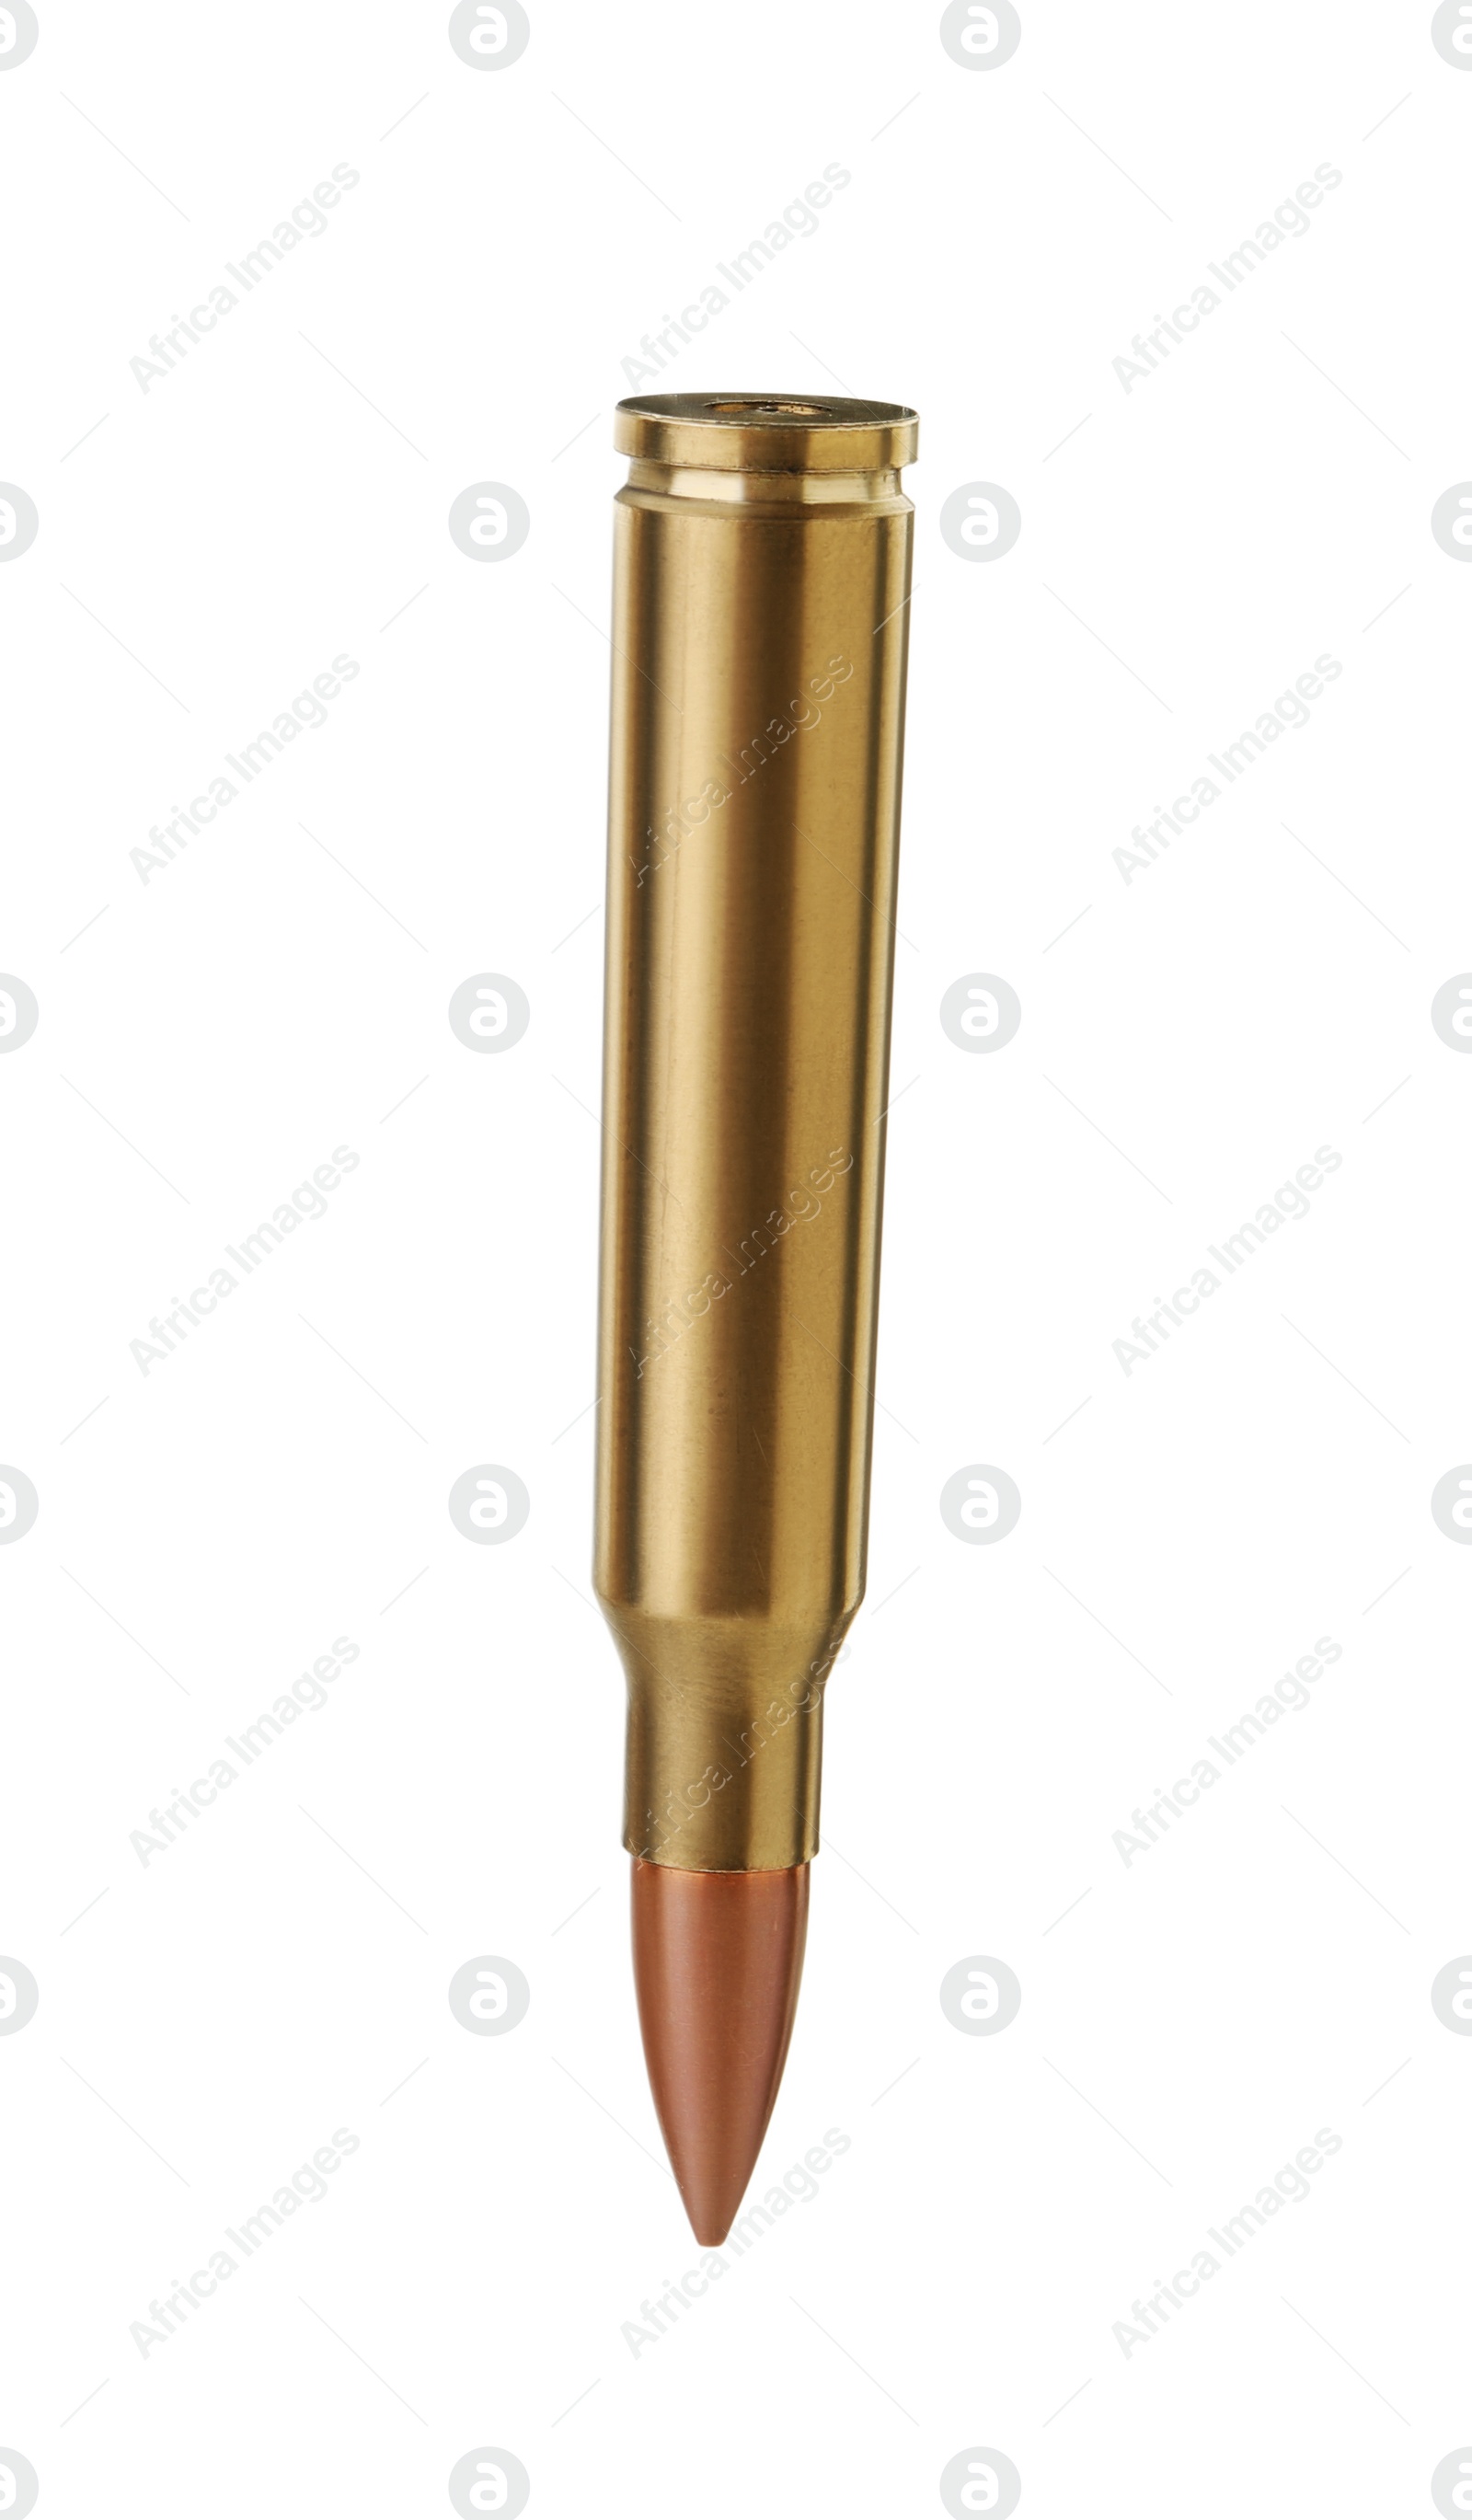 Photo of One bullet isolated on white. Firearm ammunition